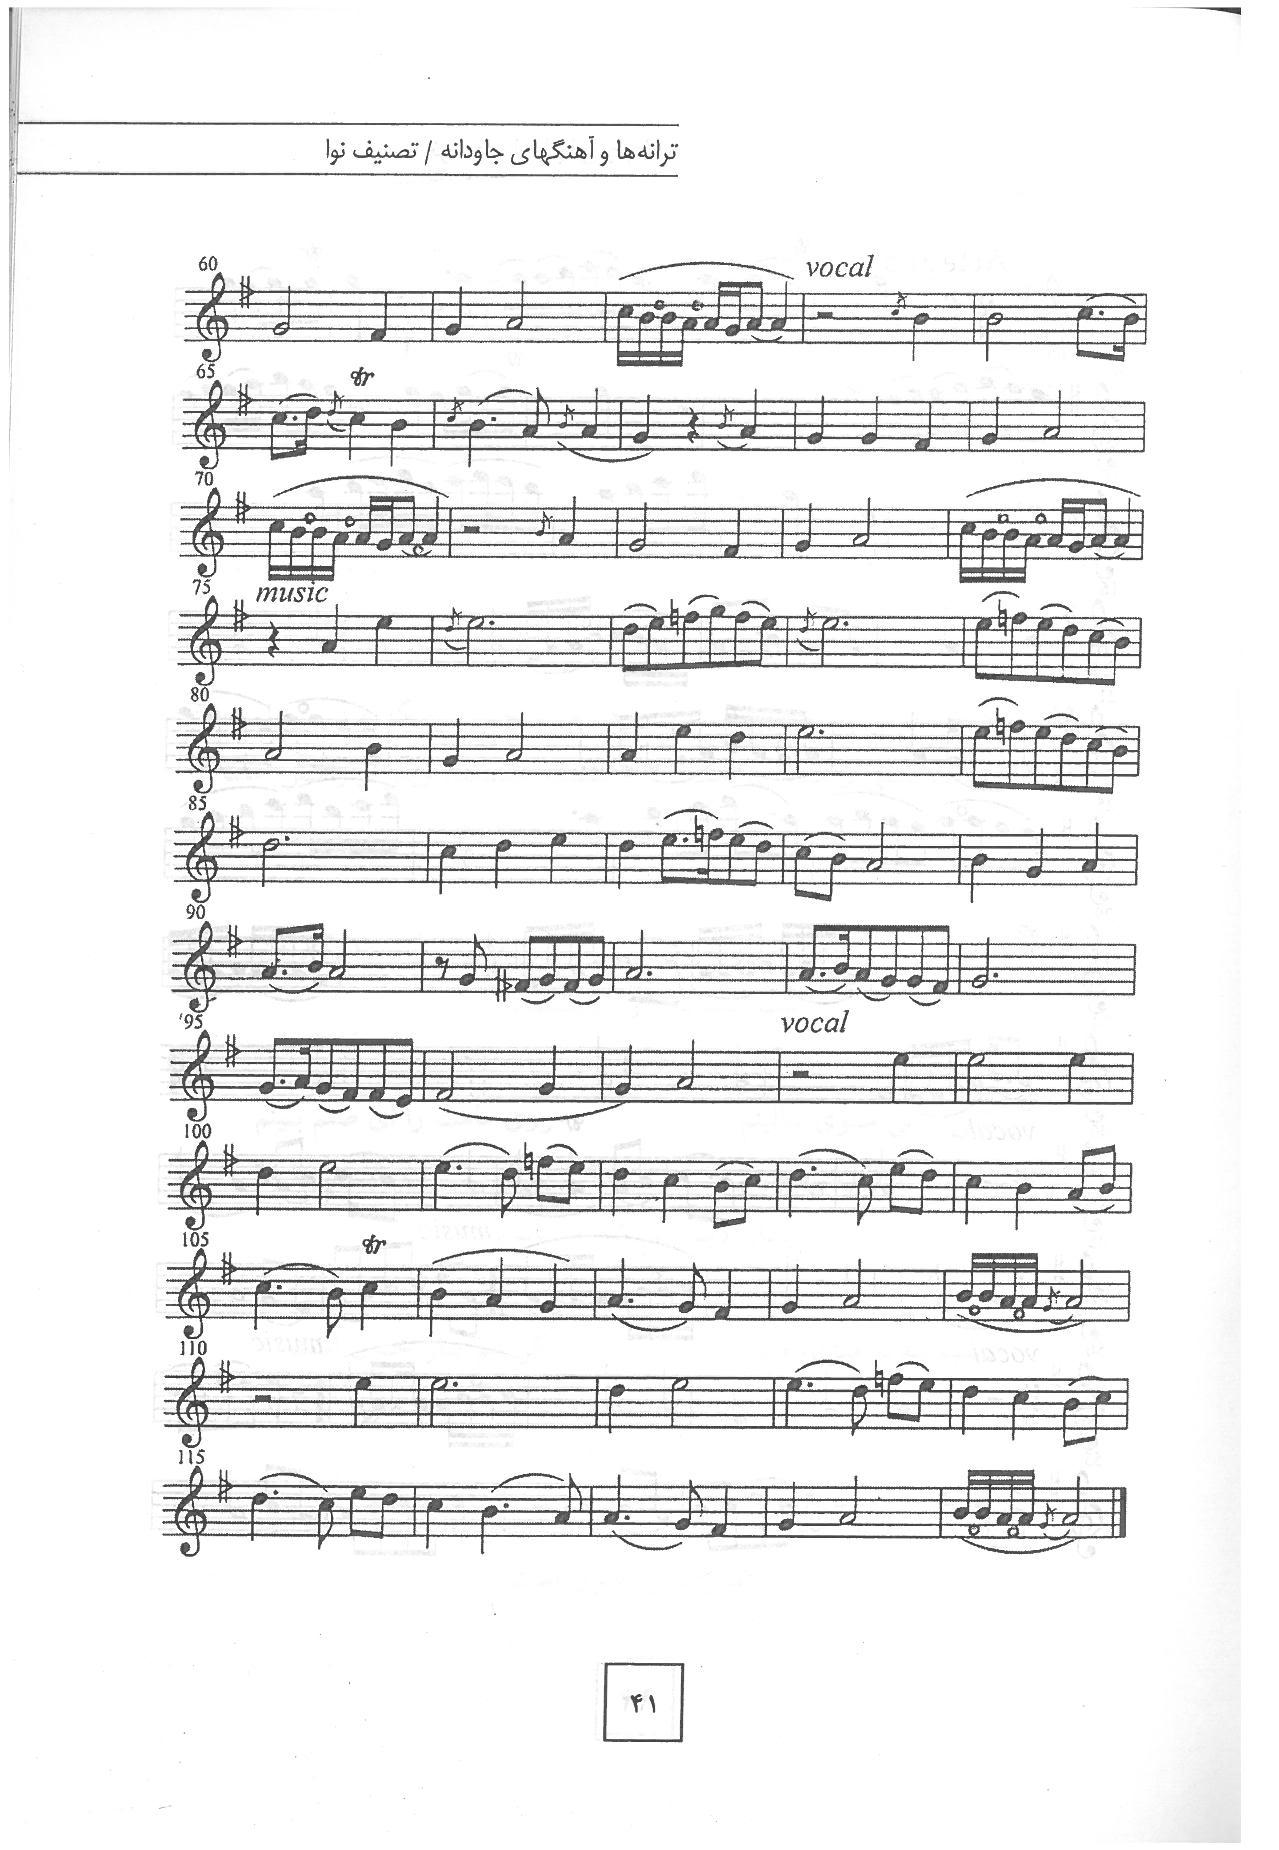 A sheet music page with many lines and notes.